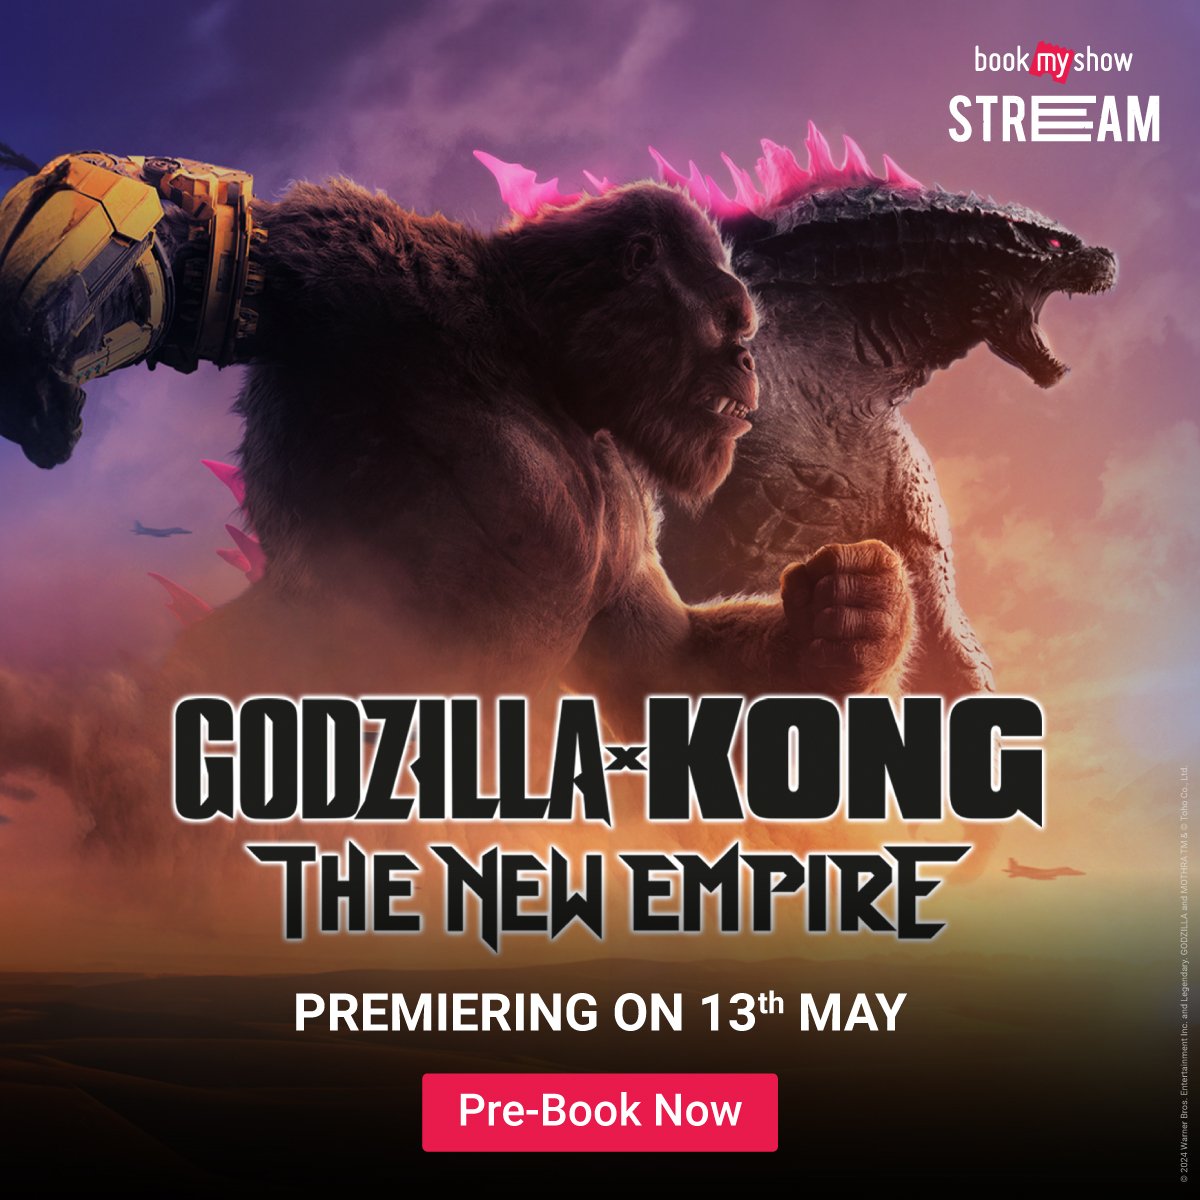 The ultimate showdown is here. 🦖👊🦍

Pre-Book #GodzillaXKongTheNewEmpire premiers on 13th May on #BookMyShowStream now! 

#GodzillaXKong #Godzilla #Kong #BuyMovies #RentMovies #StreamMovies #BestMovies #NewMovies #Trending #bms